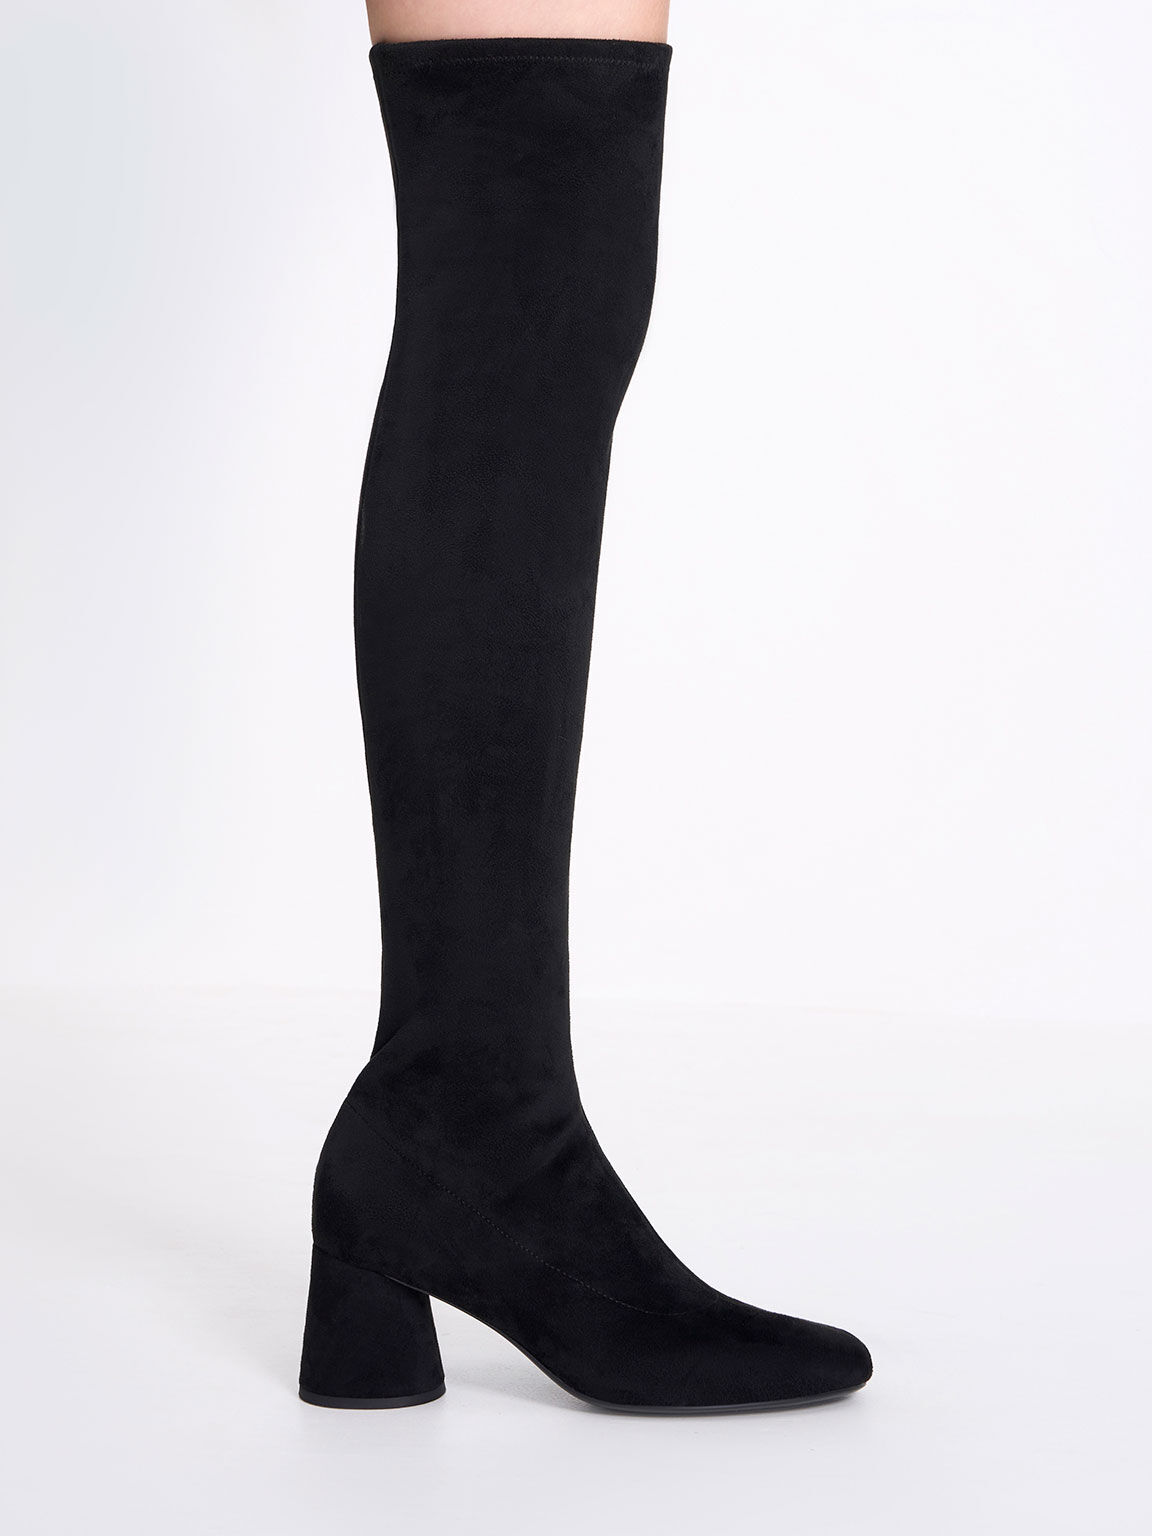 Ladies Thigh High Boots Womens Over The Knee Stiletto Heel Stretchy Shoes  Sizes | eBay